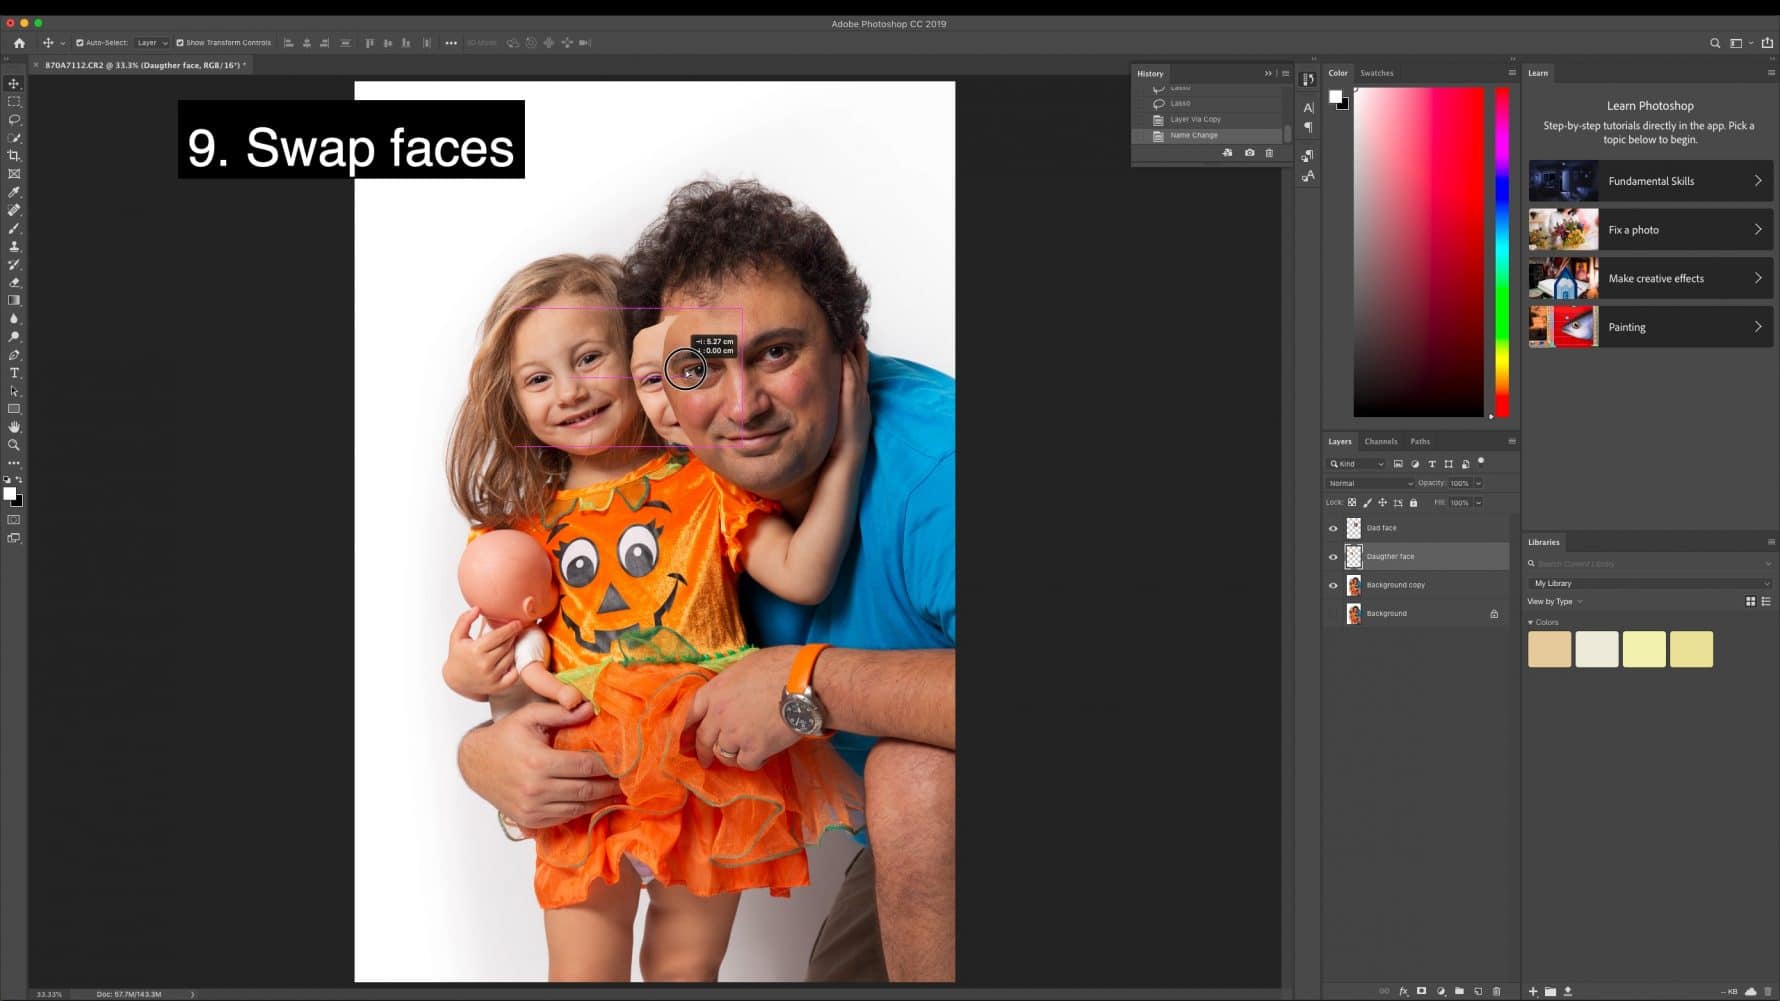 Swap faces in Photoshop